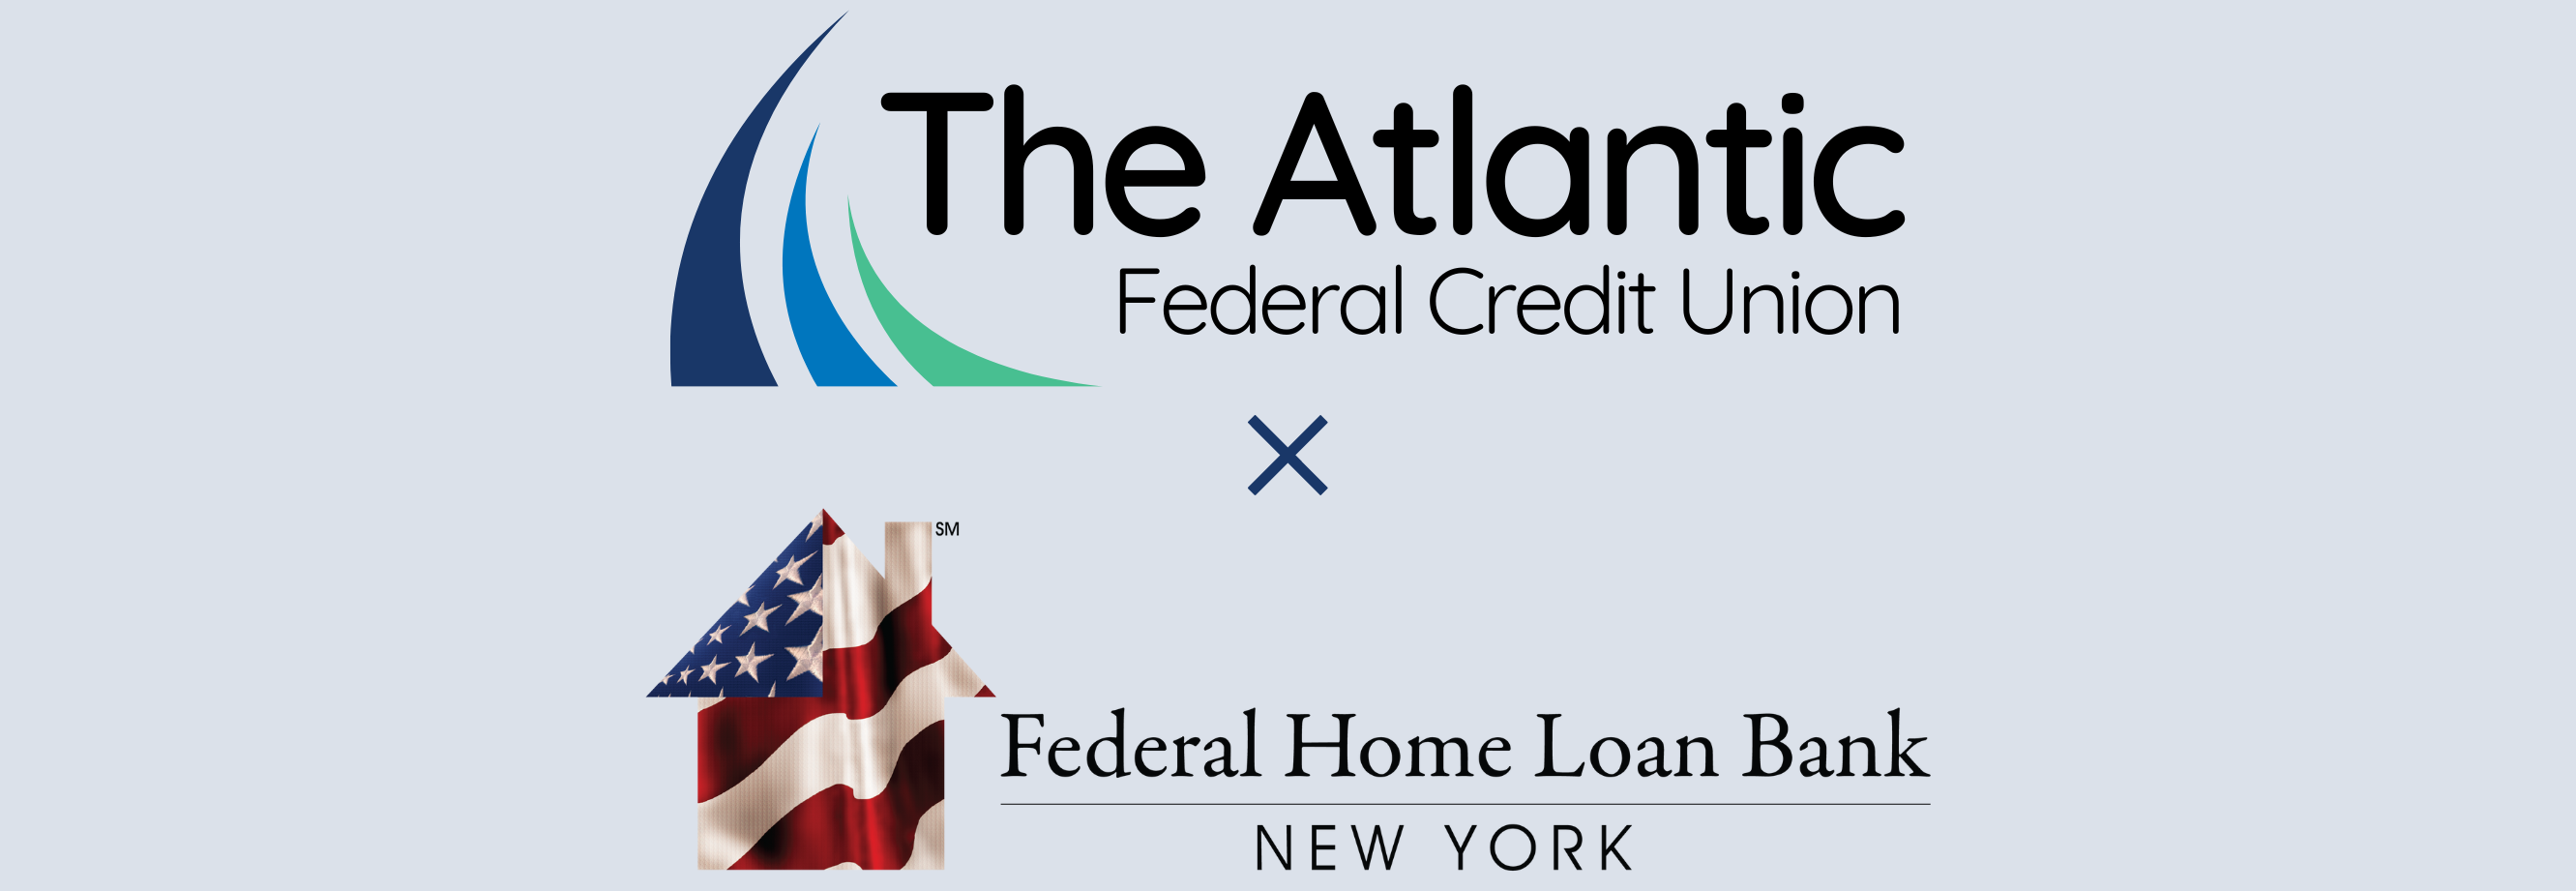 The Atlantic Federal Credit Union and Federal Home Loan Bank of New York logos